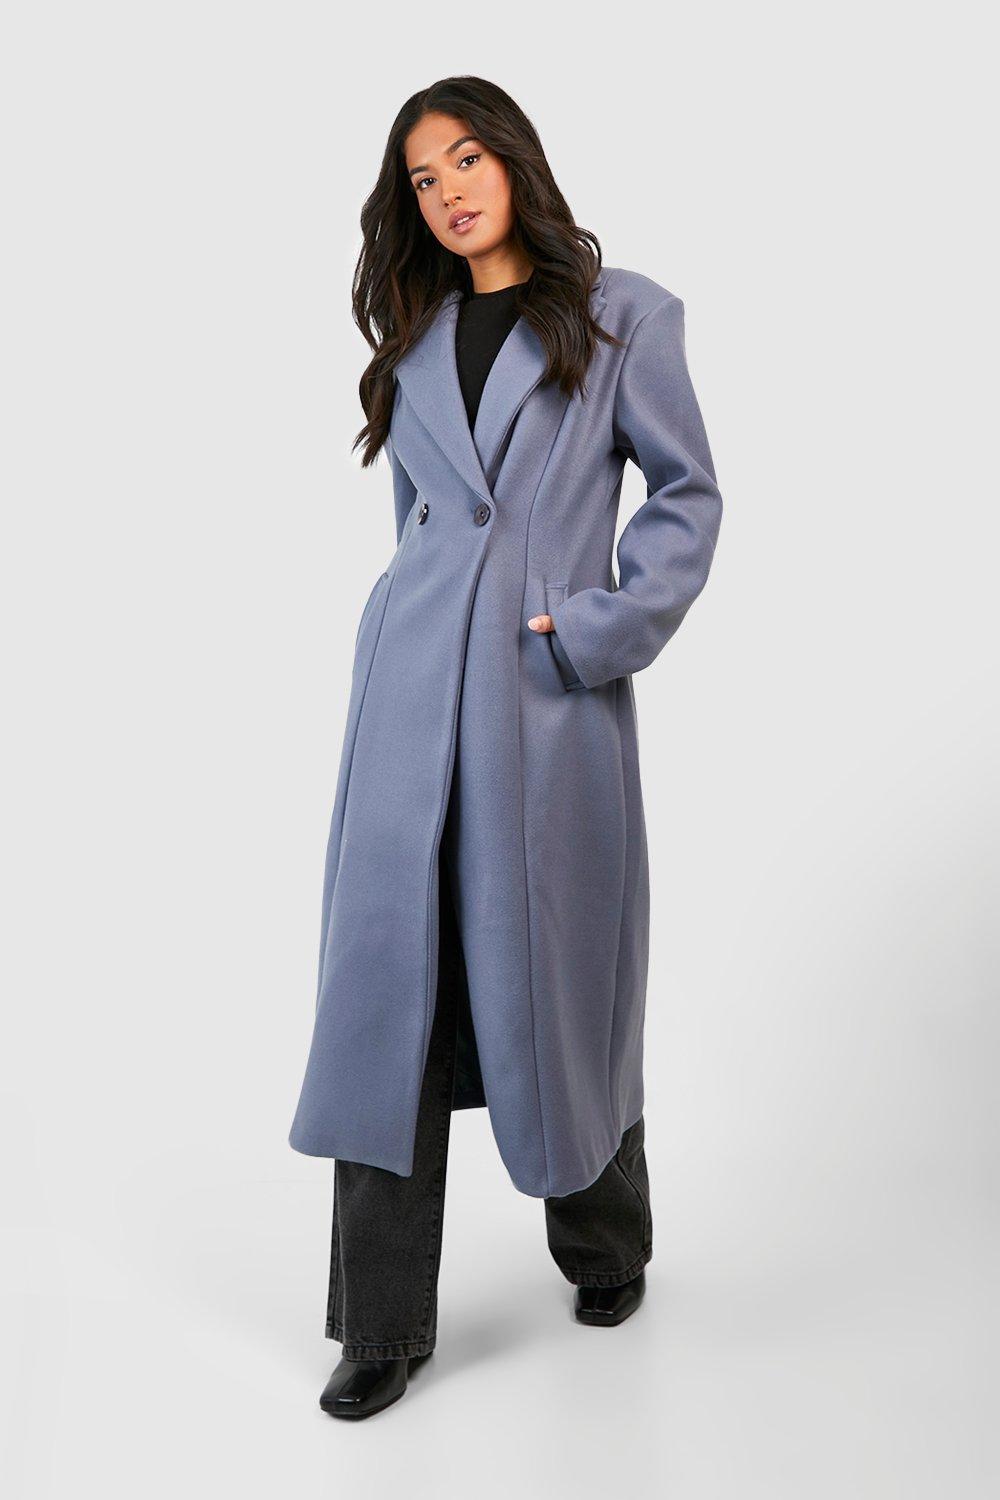 Boohoo Petite Wool Look Synched Waist Coat in Blue | Lyst UK